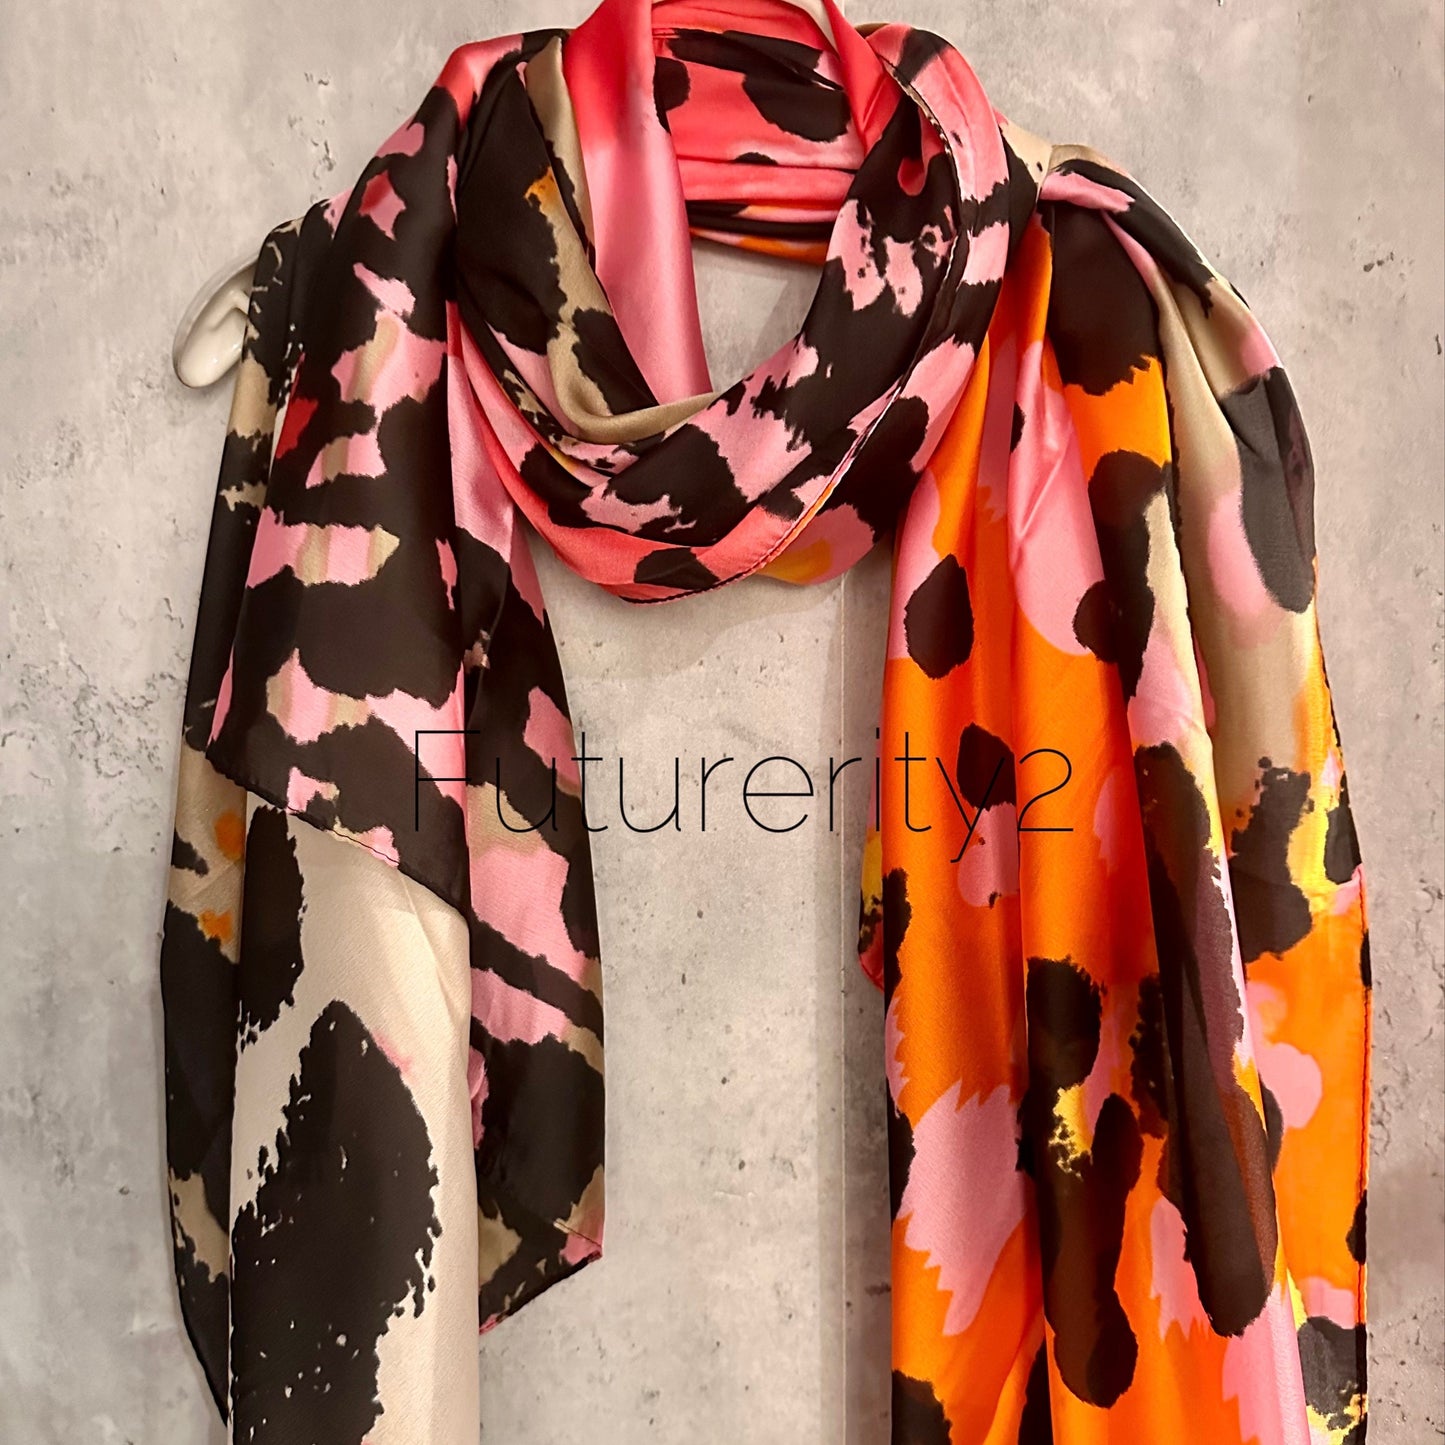 Splotches Colour Pink Orange Silk Scarf/Spring Summer Autumn Scarf/Scarf Women/Gifts For Mom/Gifts For Her Birthday Christmas/UK Seller